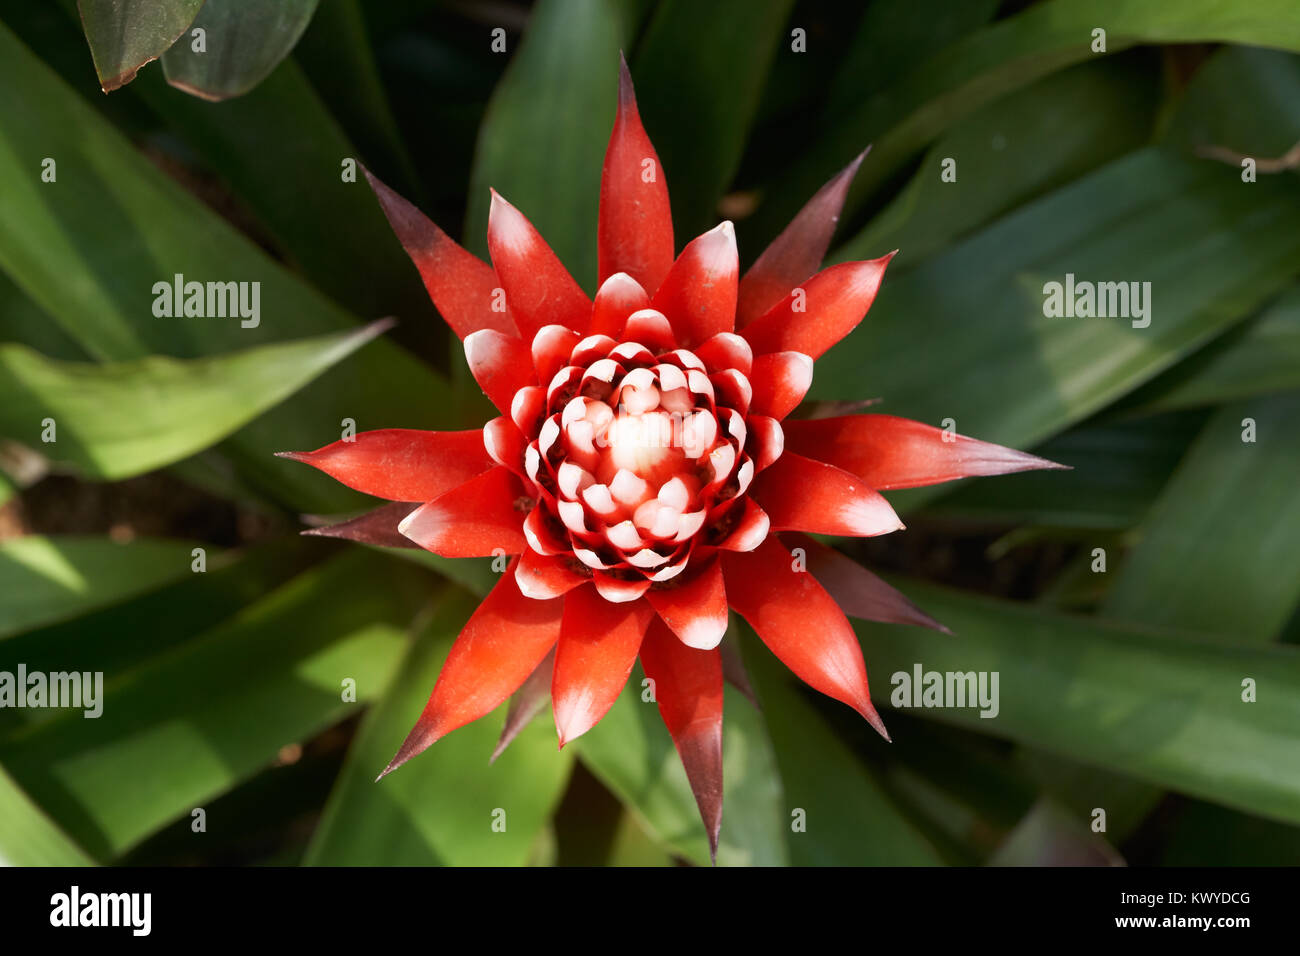 Guzmania Magnifica. Guzmania is a genus of over 120 species of flowering plants in the family Bromeliaceae. Stock Photo